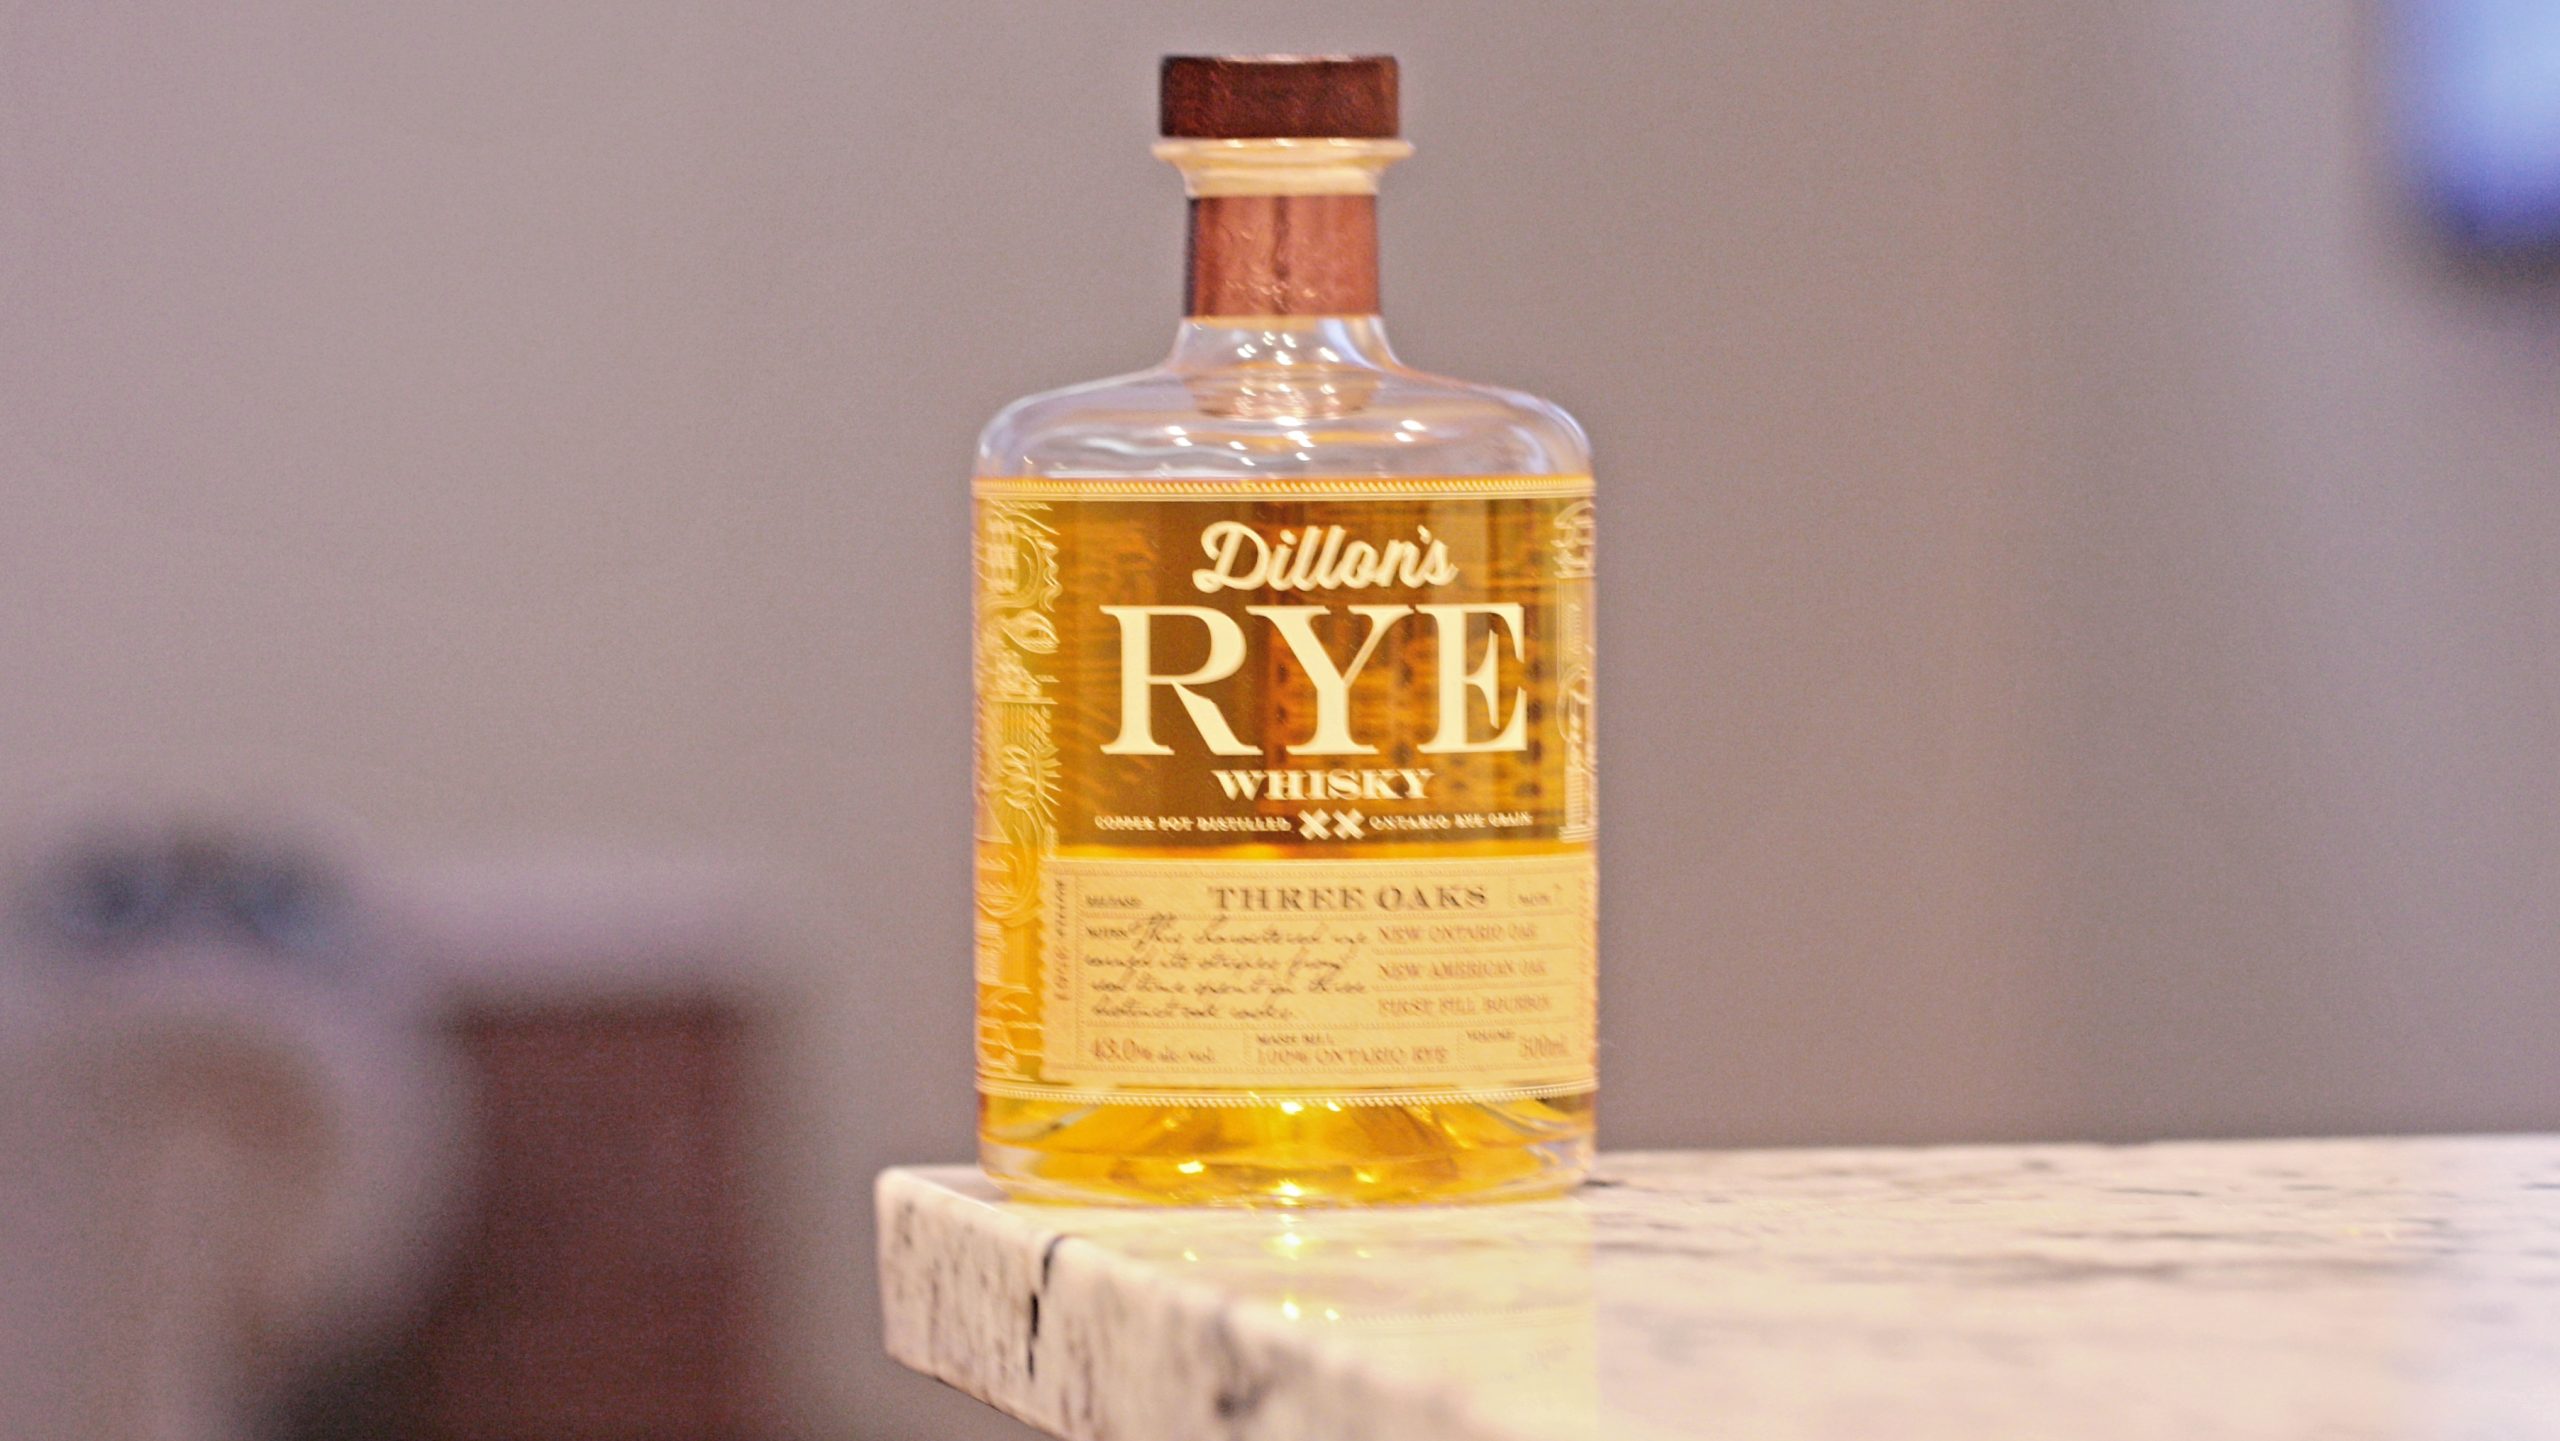 Dillon’s Rye Whisky Review